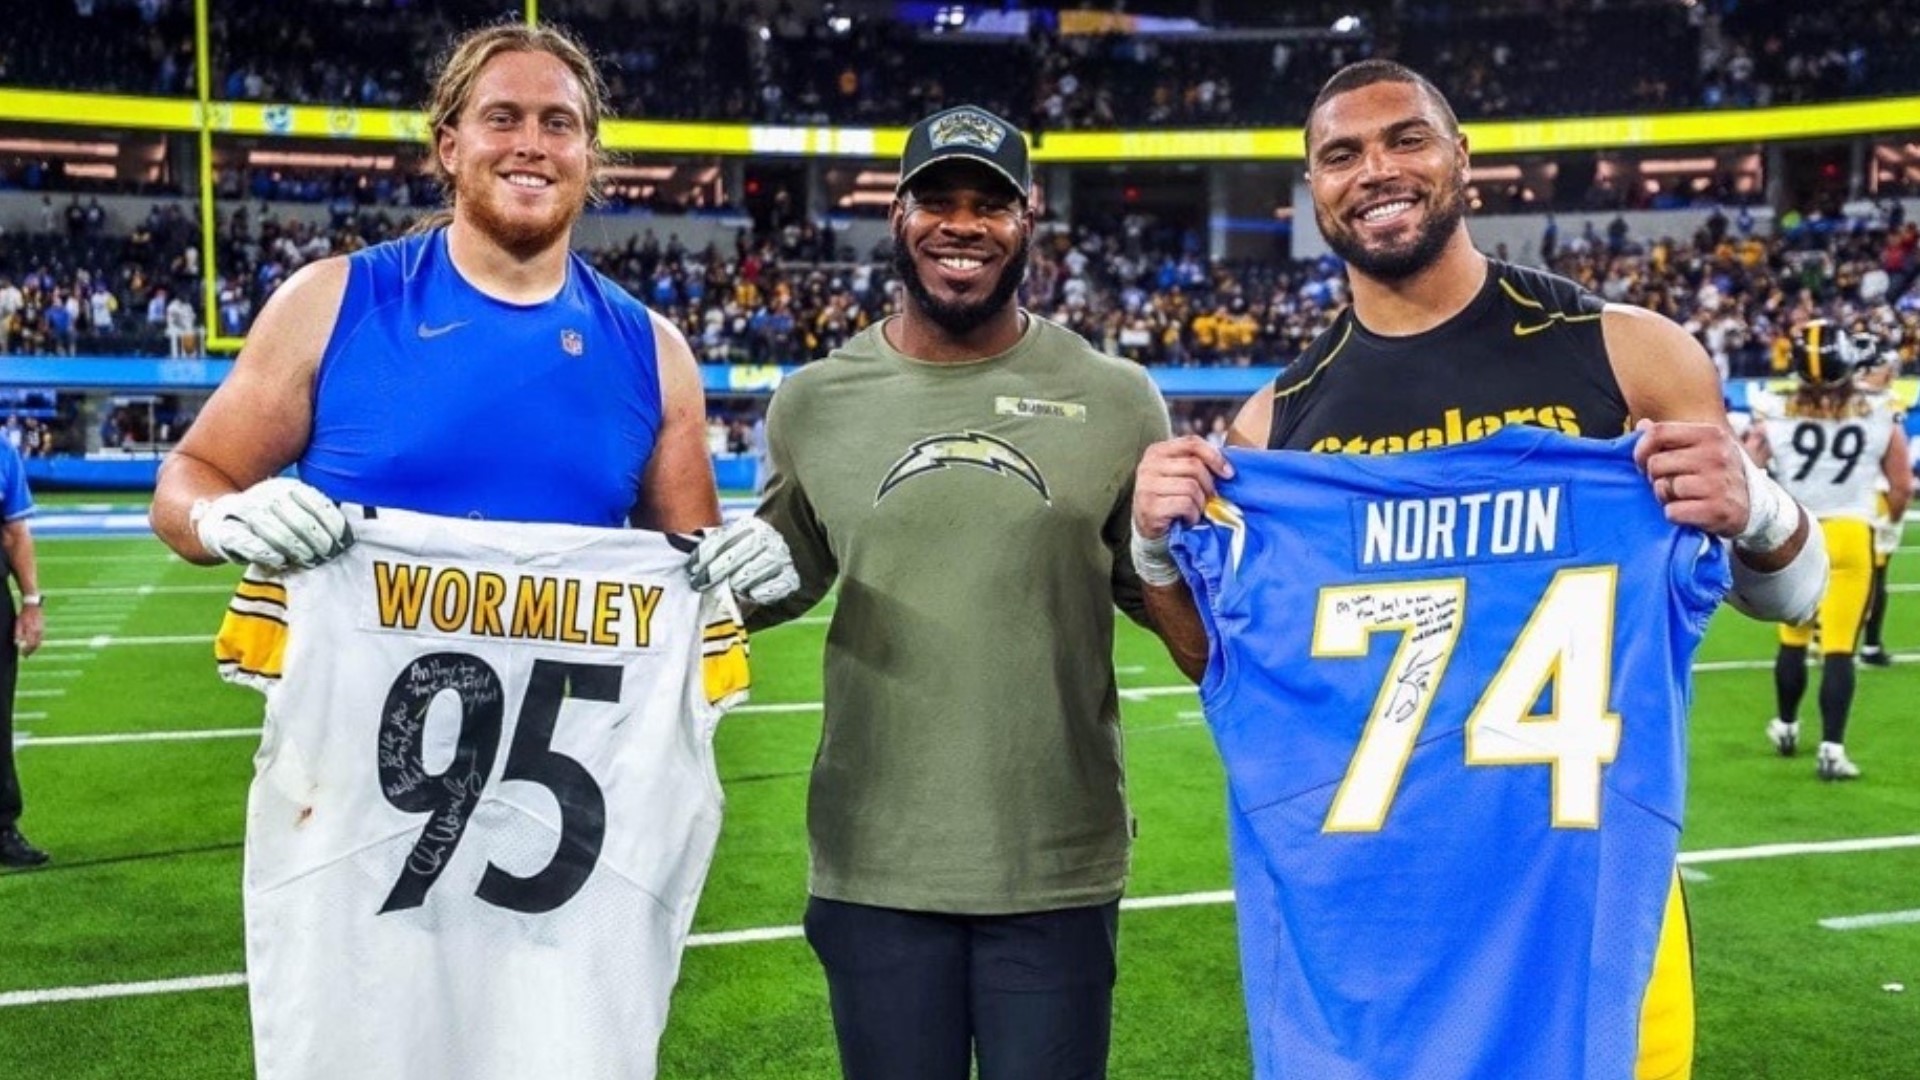 Chris Wormley and Storm Norton are best friends. They were high school teammates at Whitmer High School. Now, both are in the NFL and on opposite sides of the field.